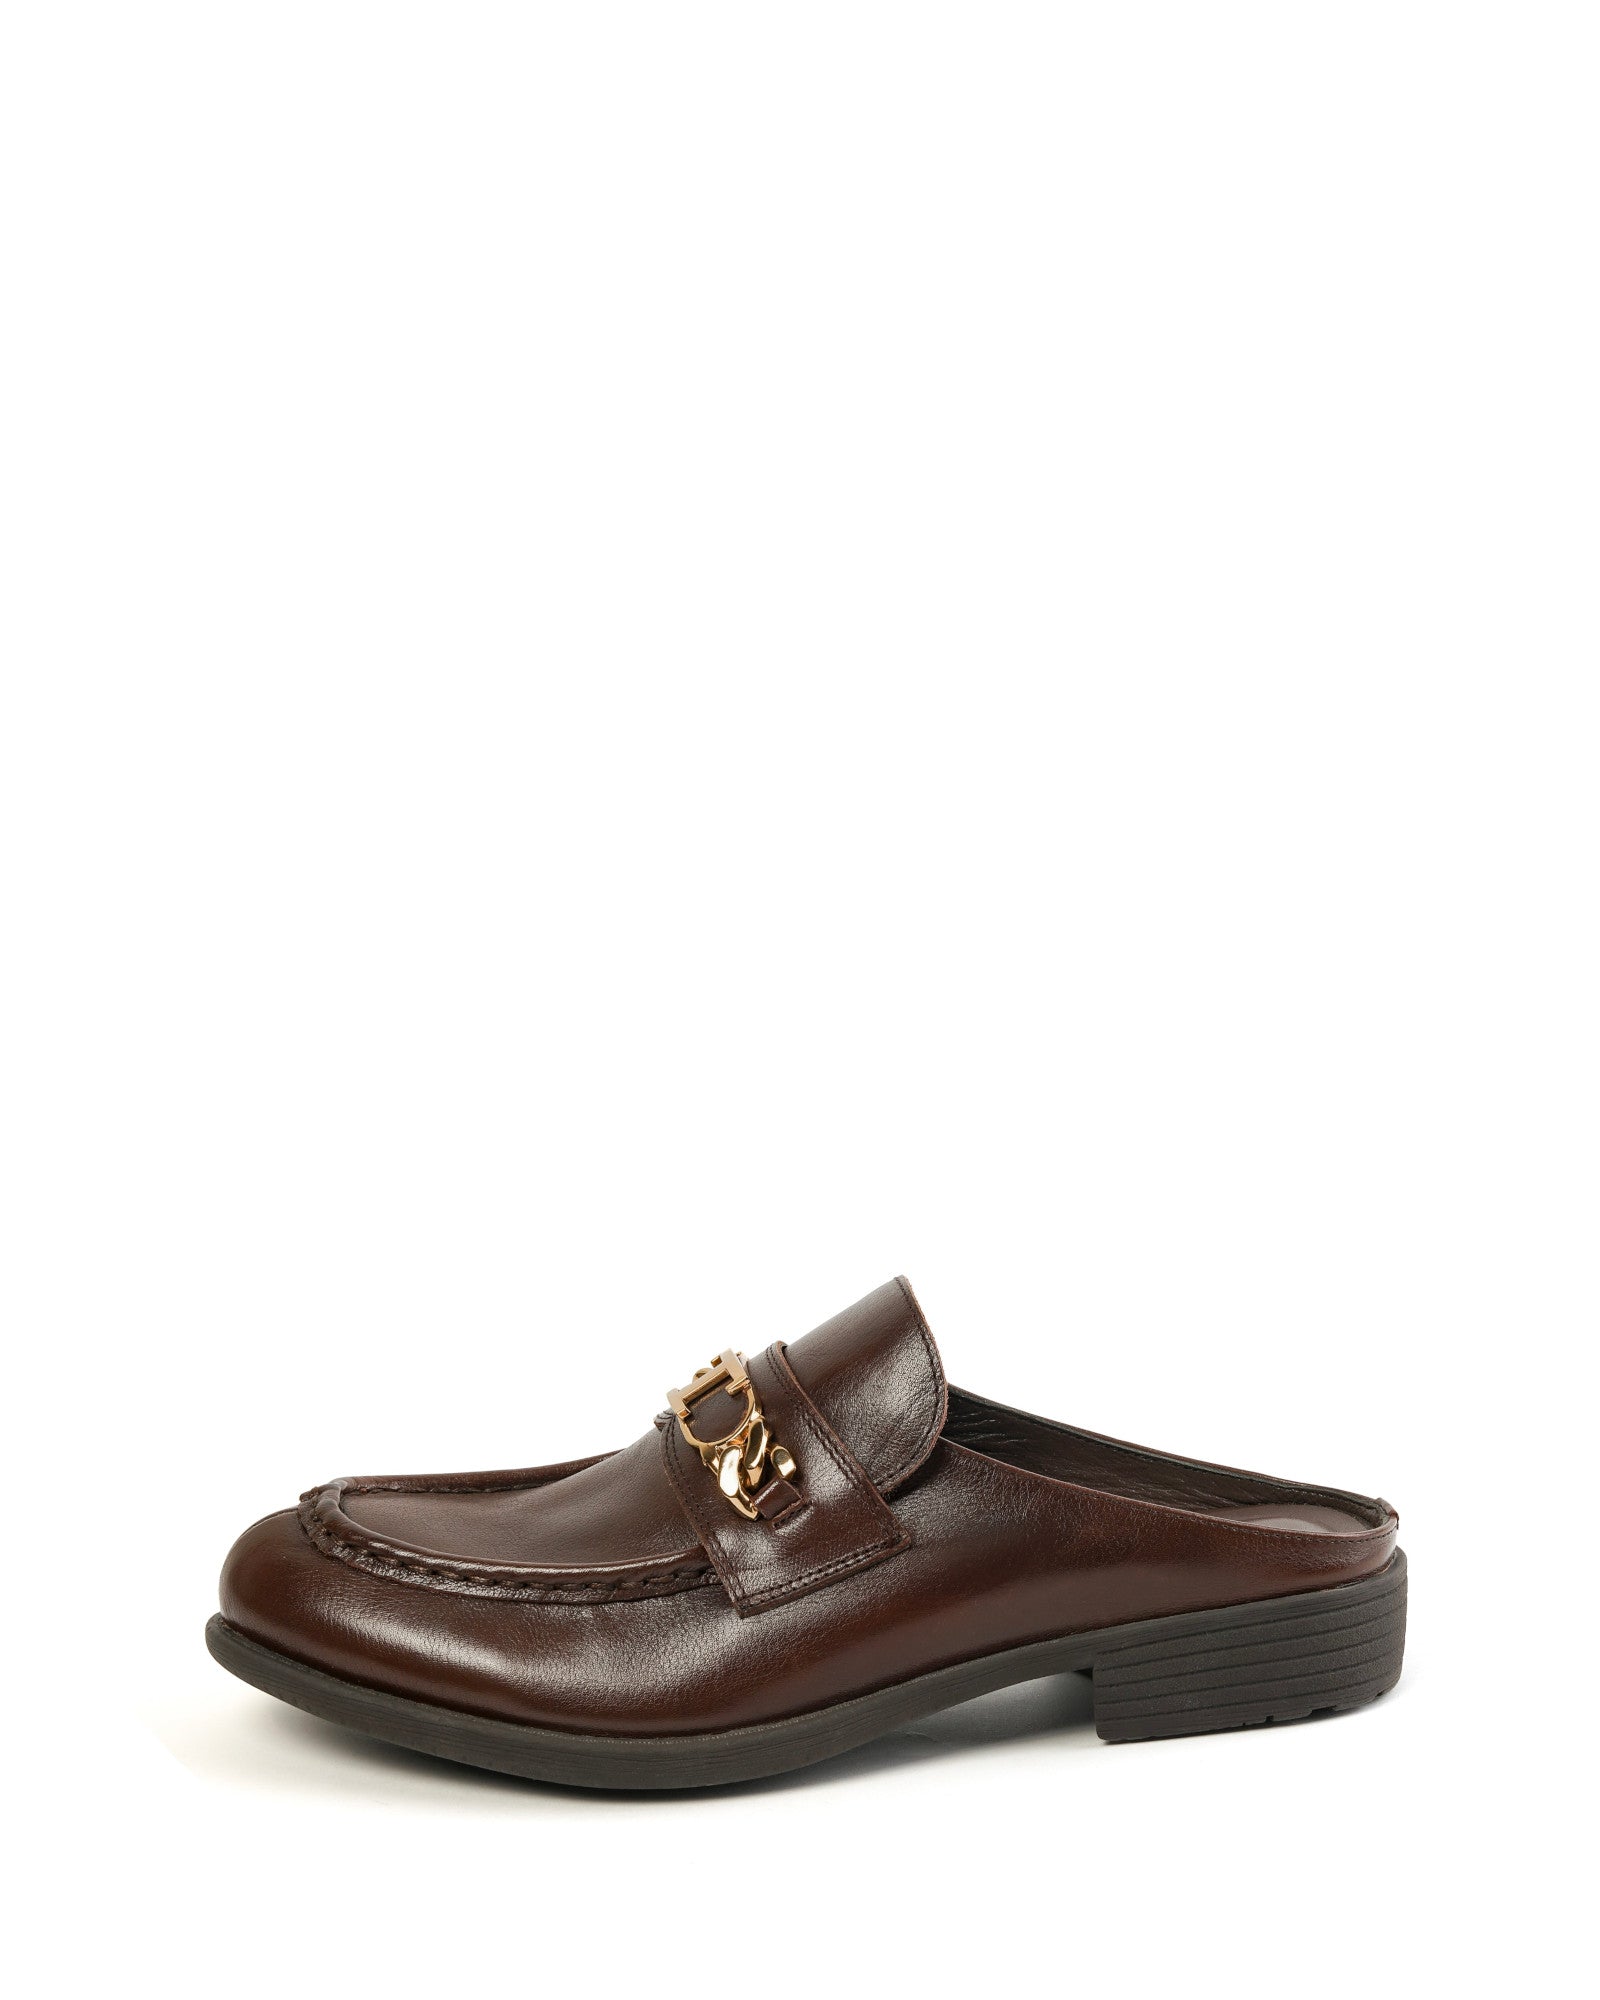 katni-mule-loafers-brown-leather-1